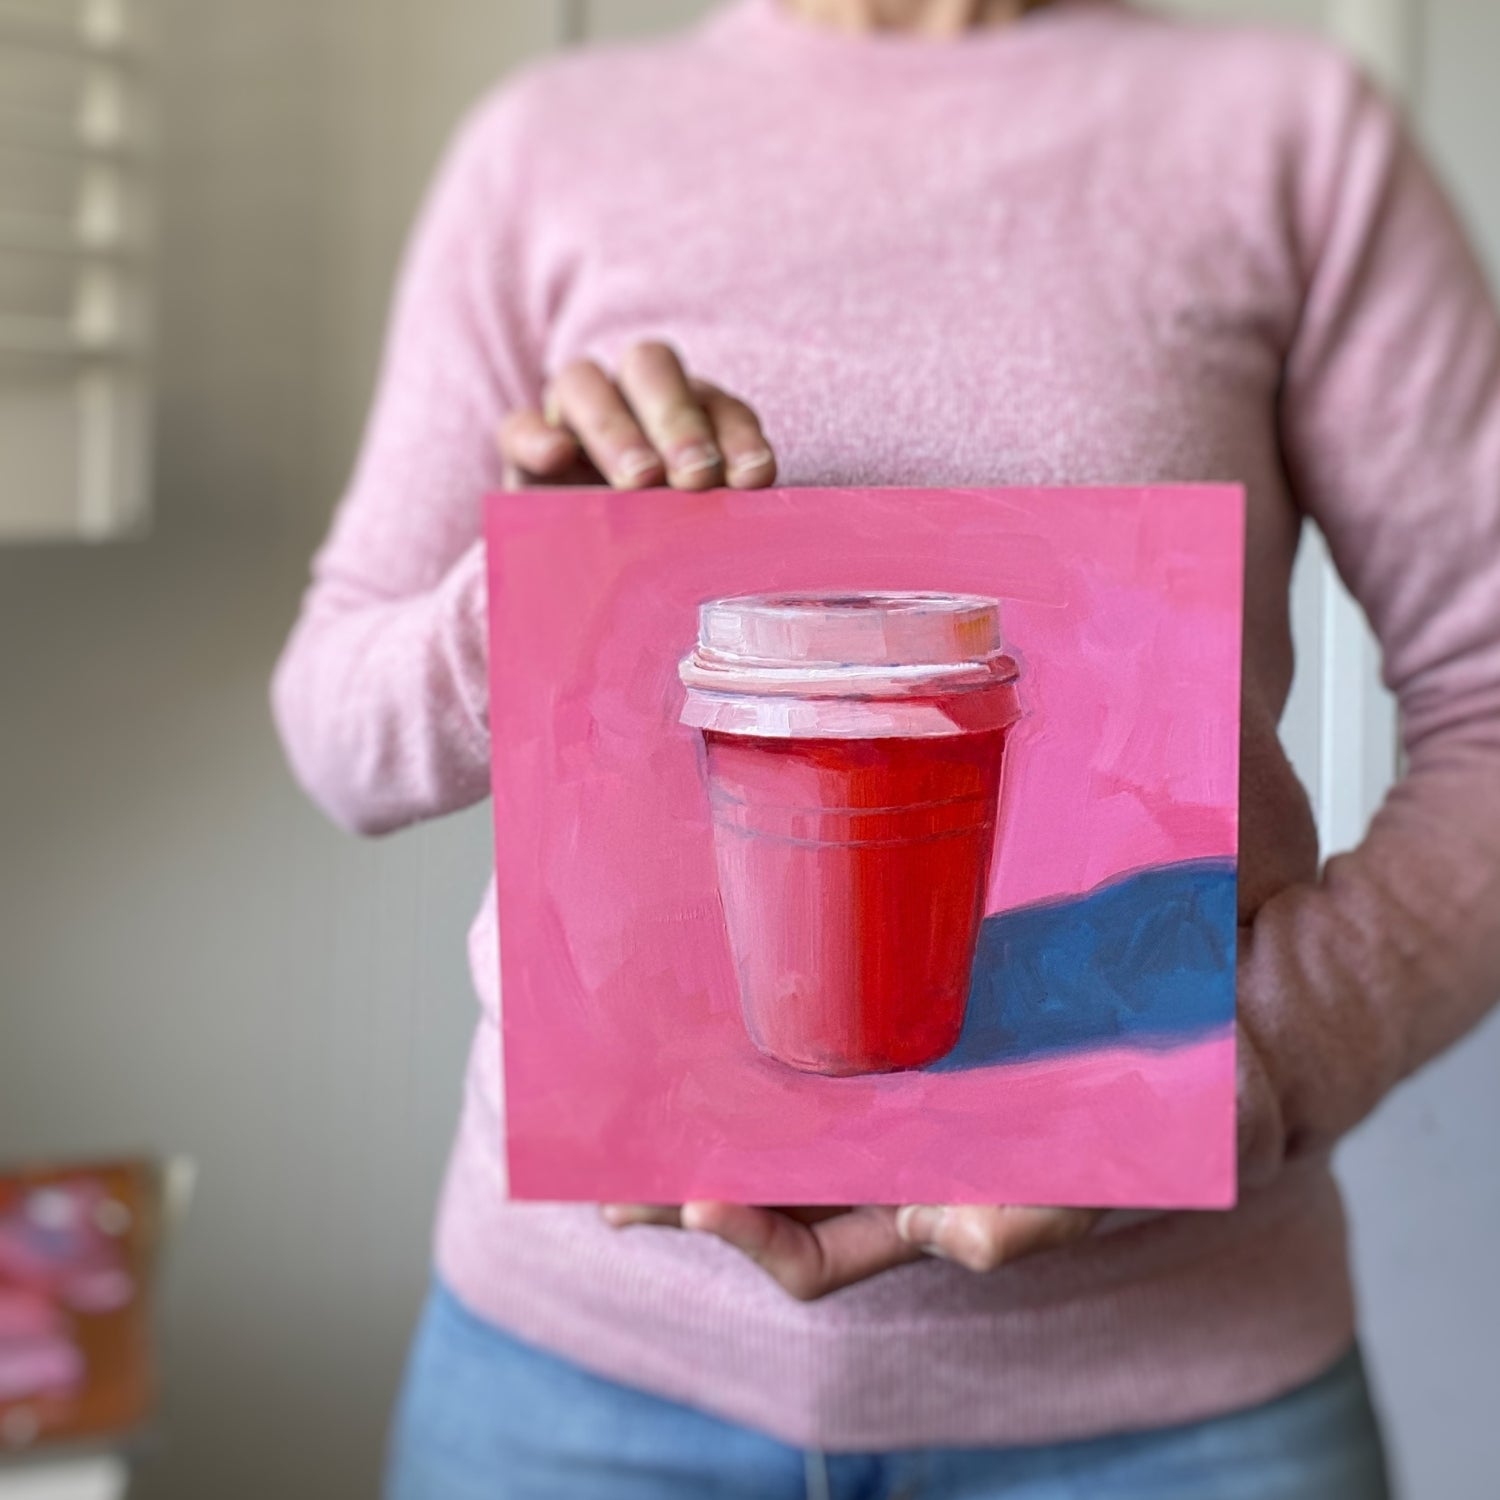 photo of a person holding an original oil painting of a pink and red take away coffee cup on a textured bright pink background with strong greyish blue shadows.